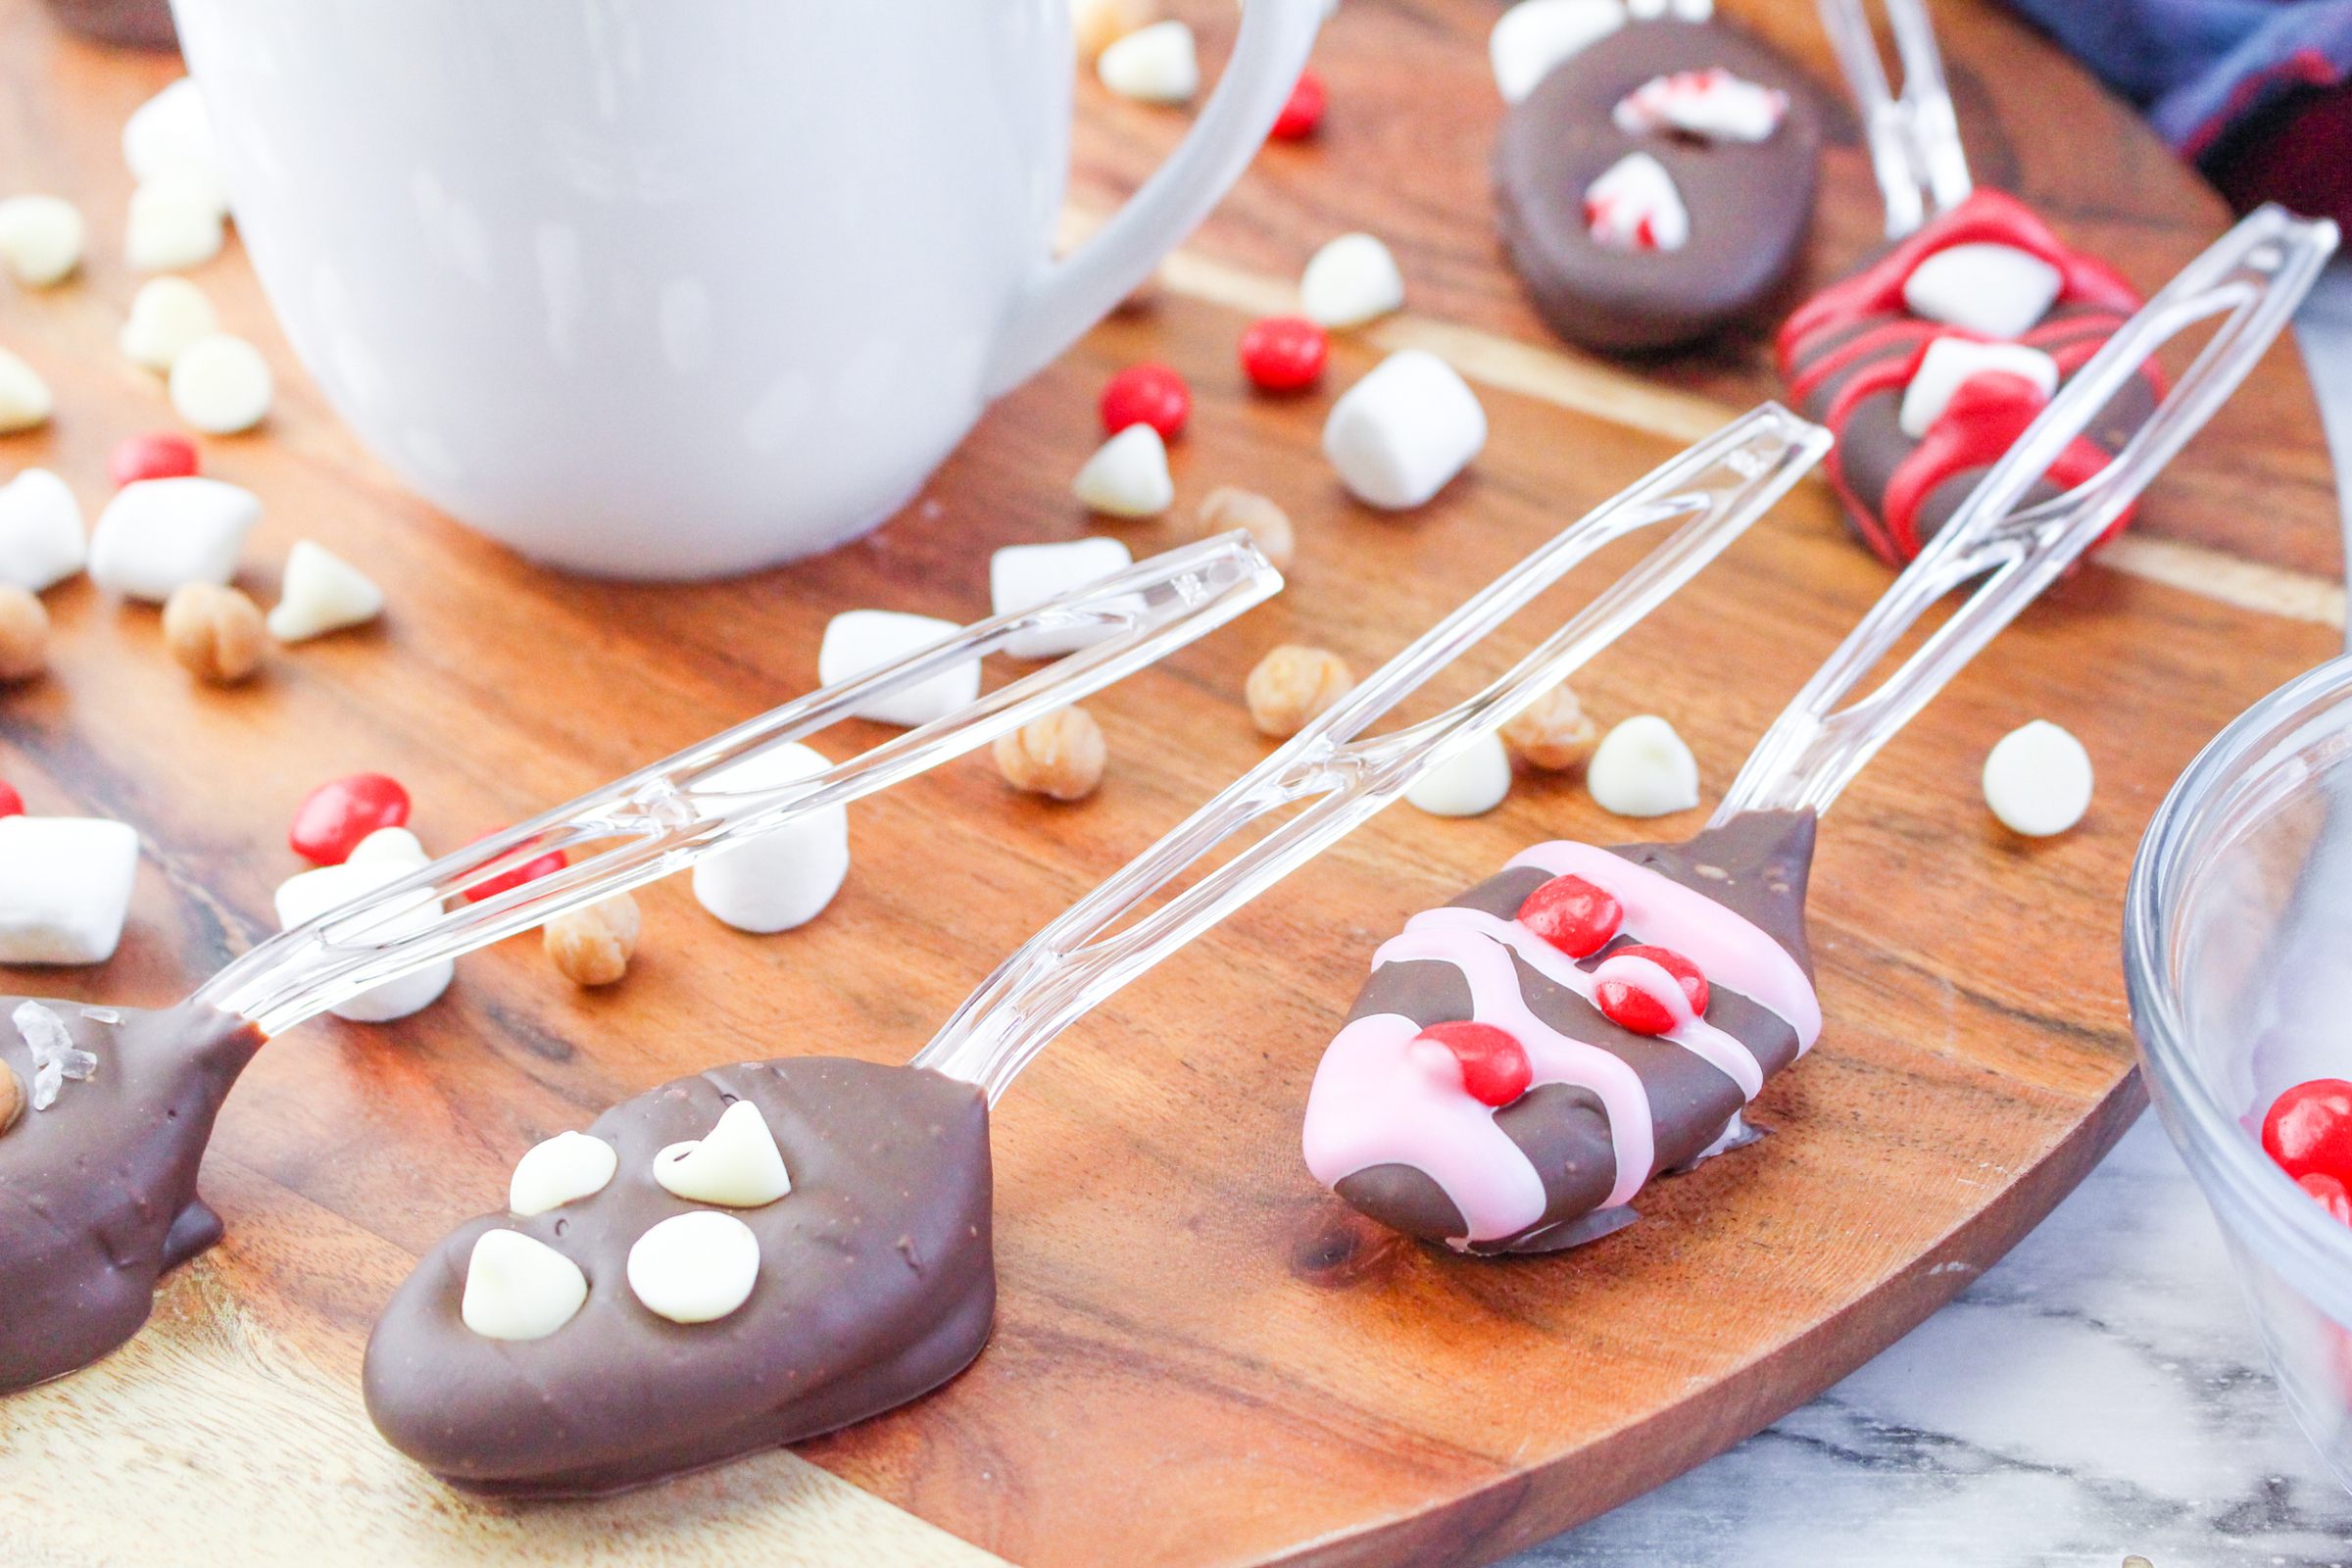 5 hot chocolate spoons on a wooden background with a white mug.